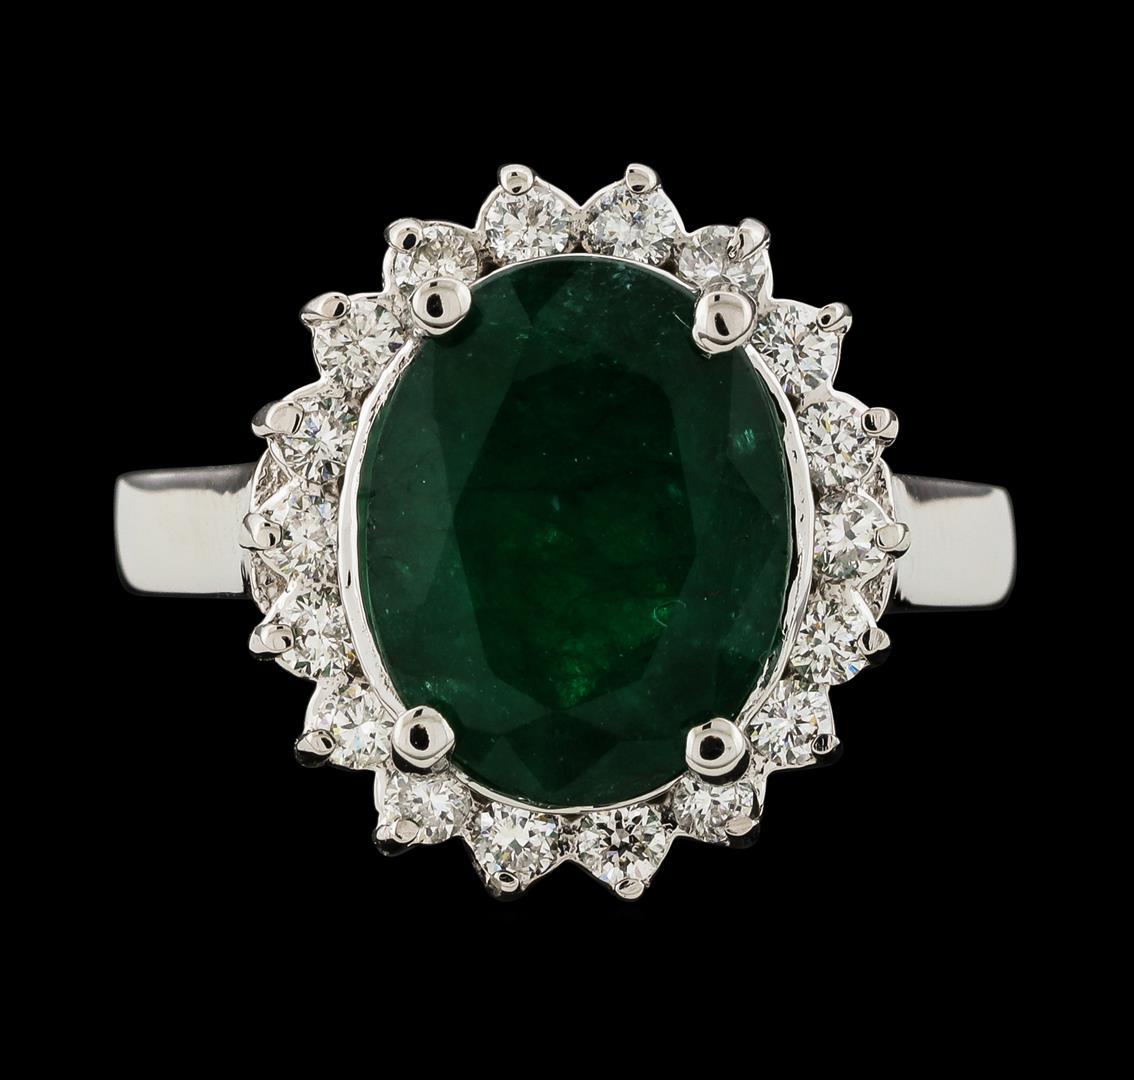 4.38 ctw Emerald and Diamond Ring - 14KT White Gold